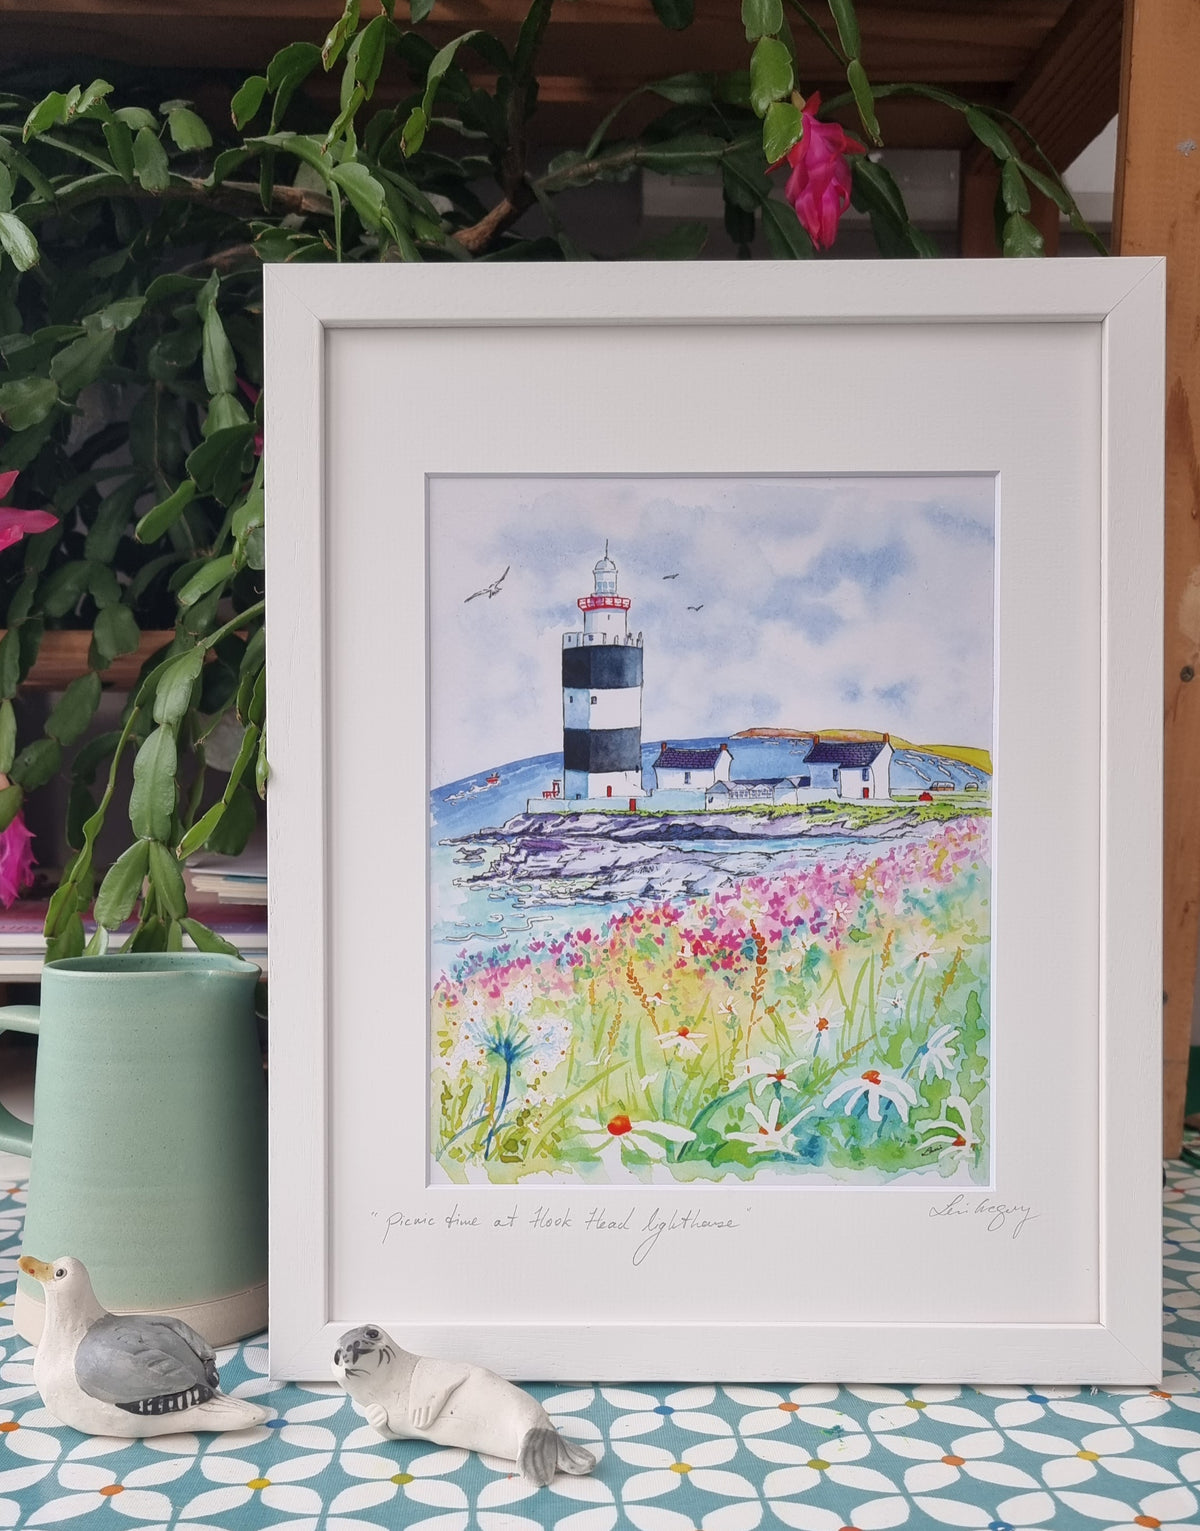 " picnic time at Hook Head lighthouse"